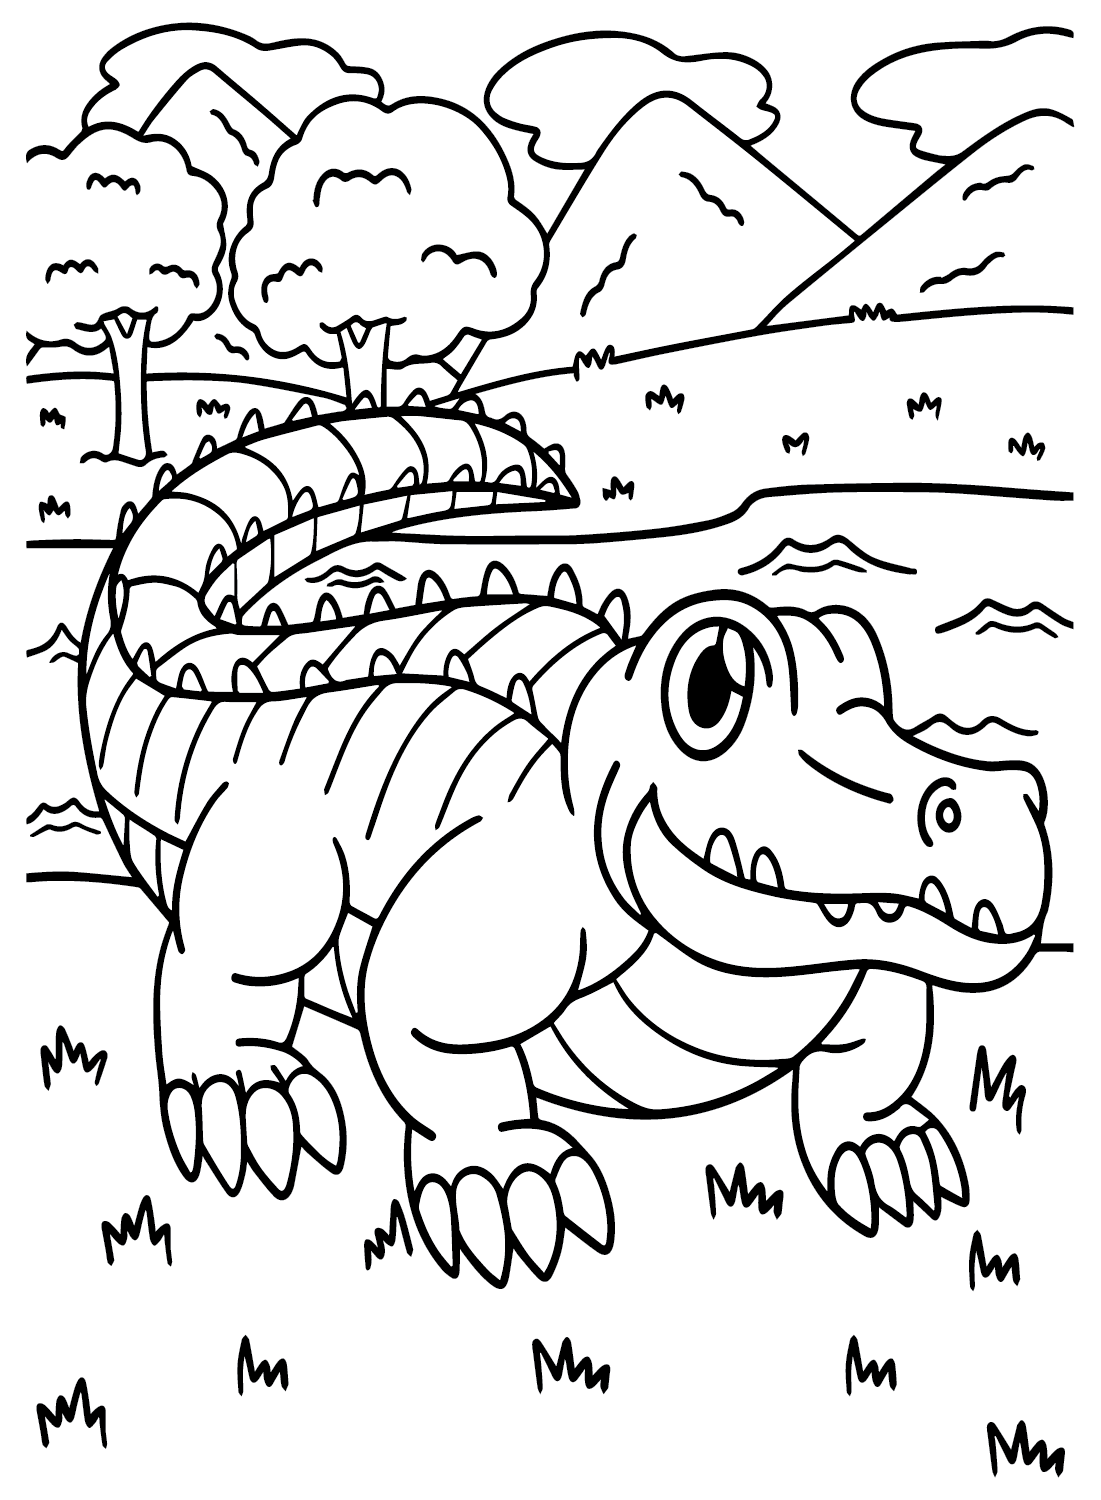 Vector The Crocodile Coloring Page from Crocodile